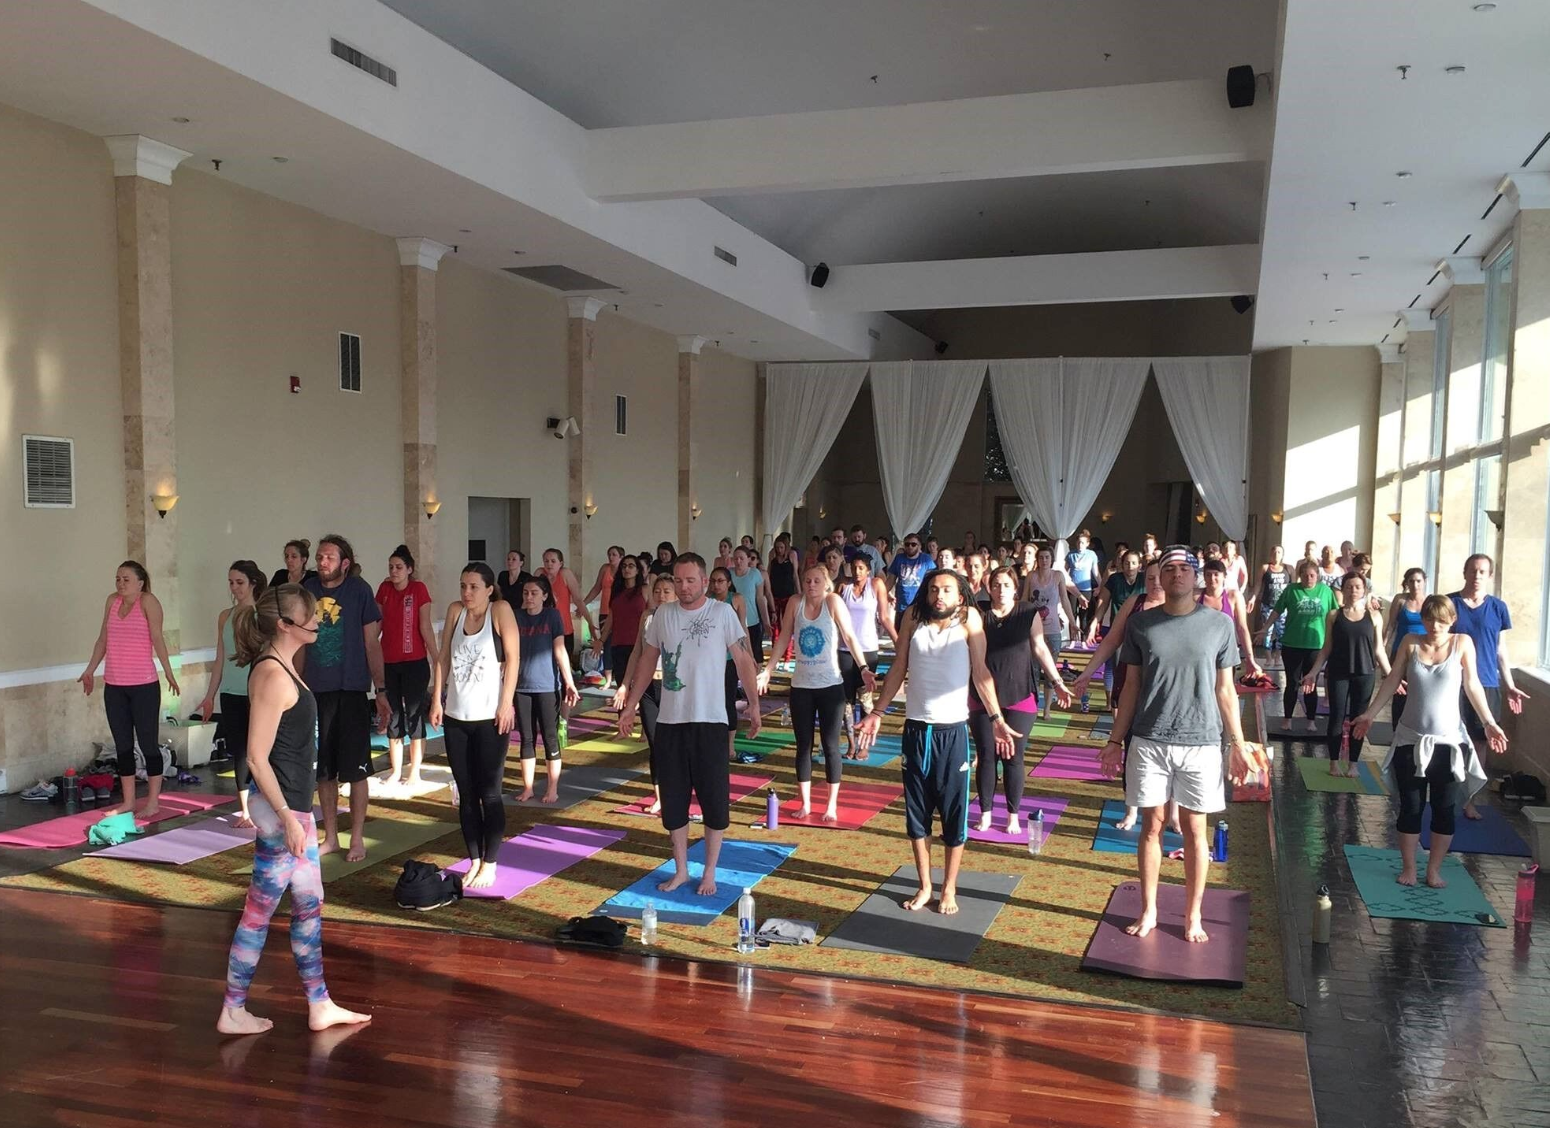 Find Your Inner Peace During A Free Yoga Session at Park Tavern